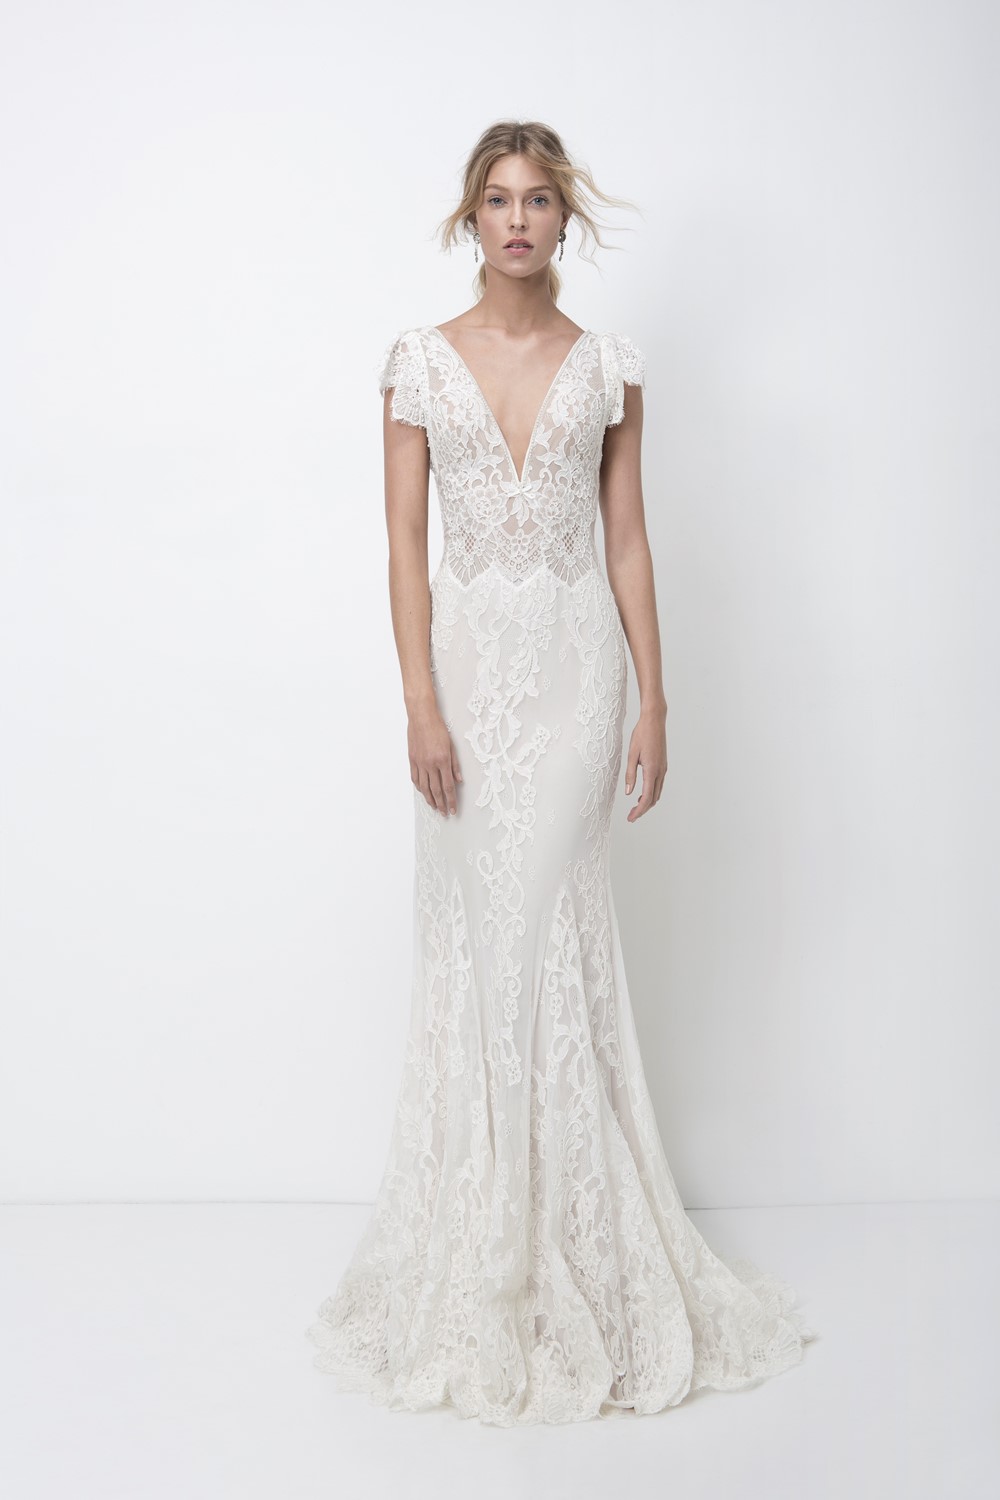 Luna Wedding Dress from Lihi Hod's 2018 Bridal Collection